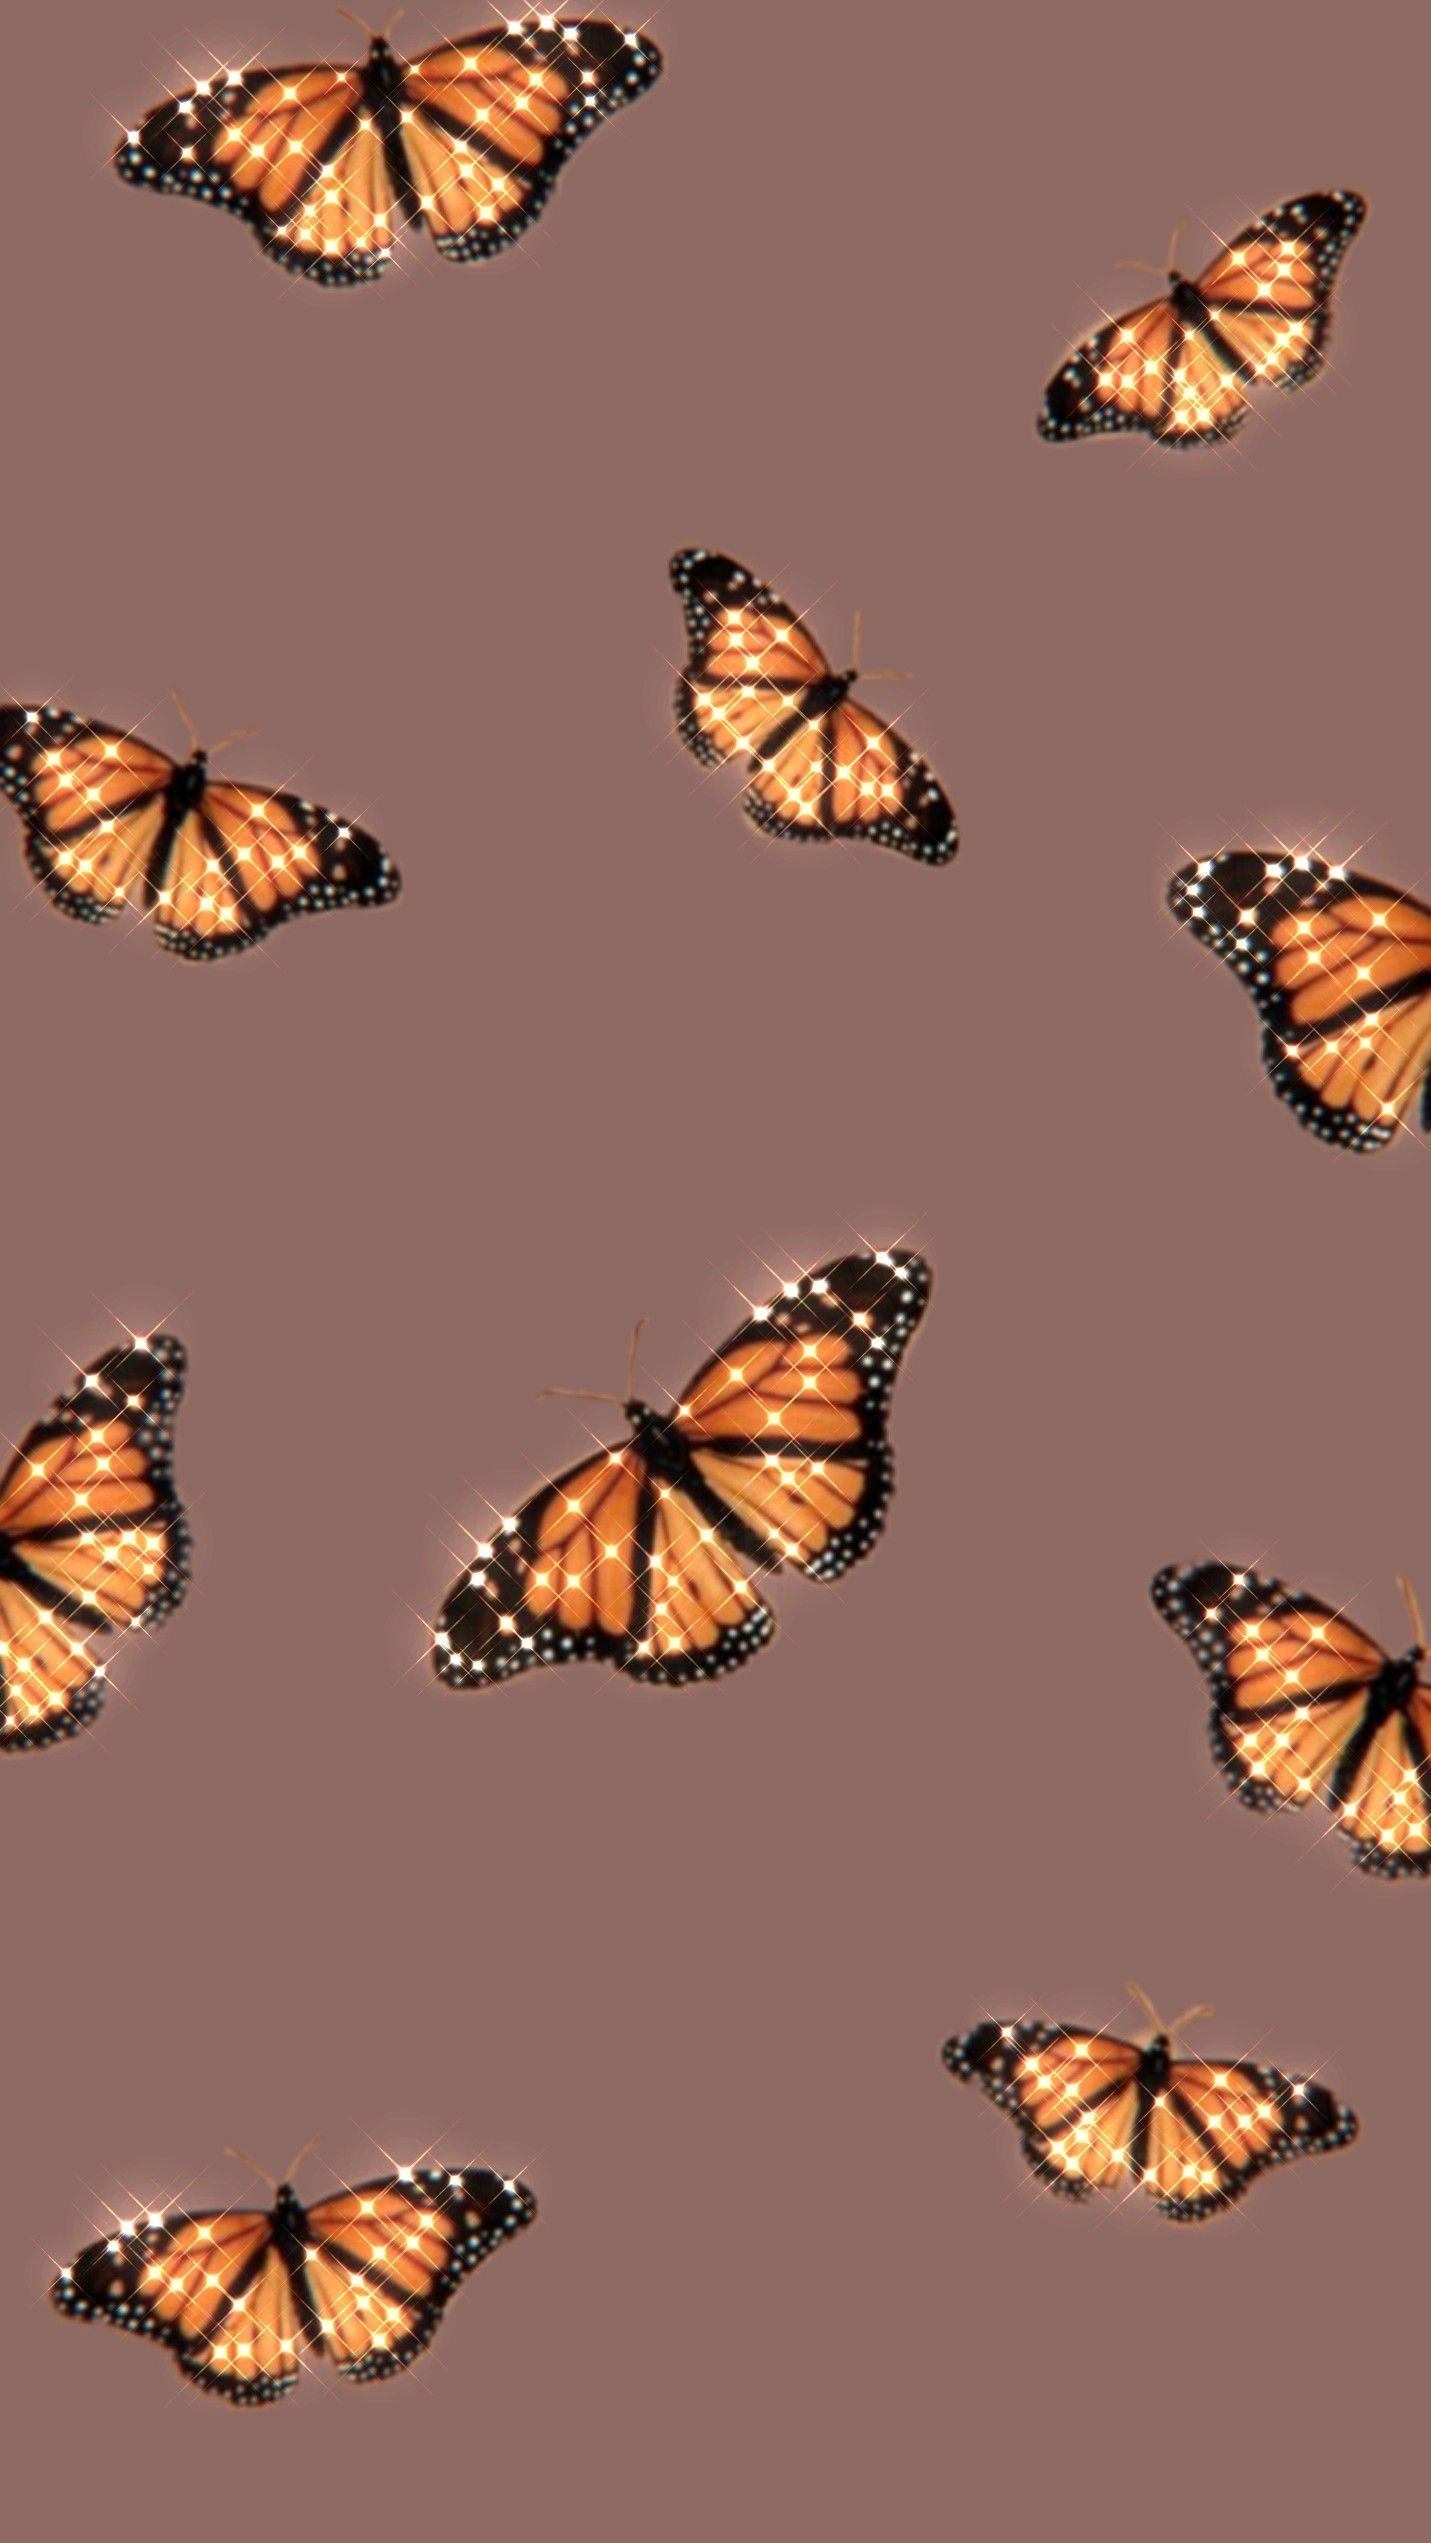 Aesthetic Butterfly Wallpapers Wallpaper Cave - Reverasite